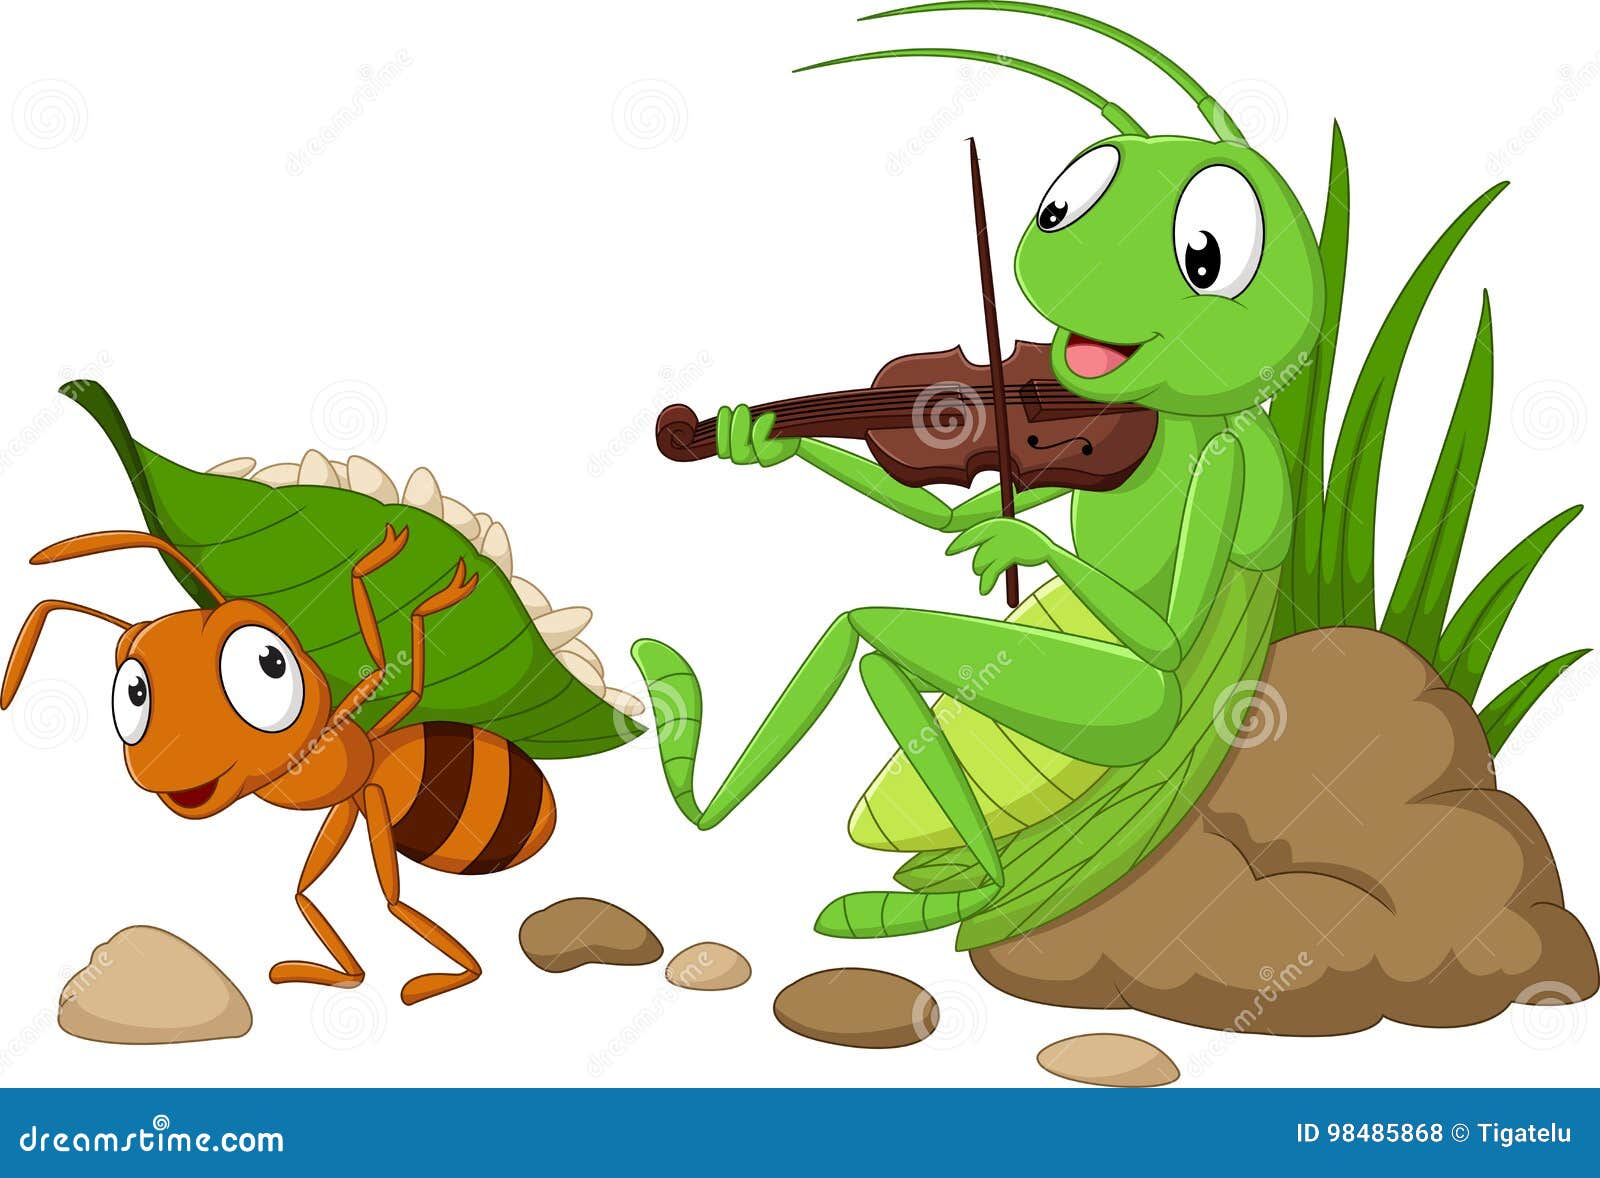 cartoon the ant and the grasshopper